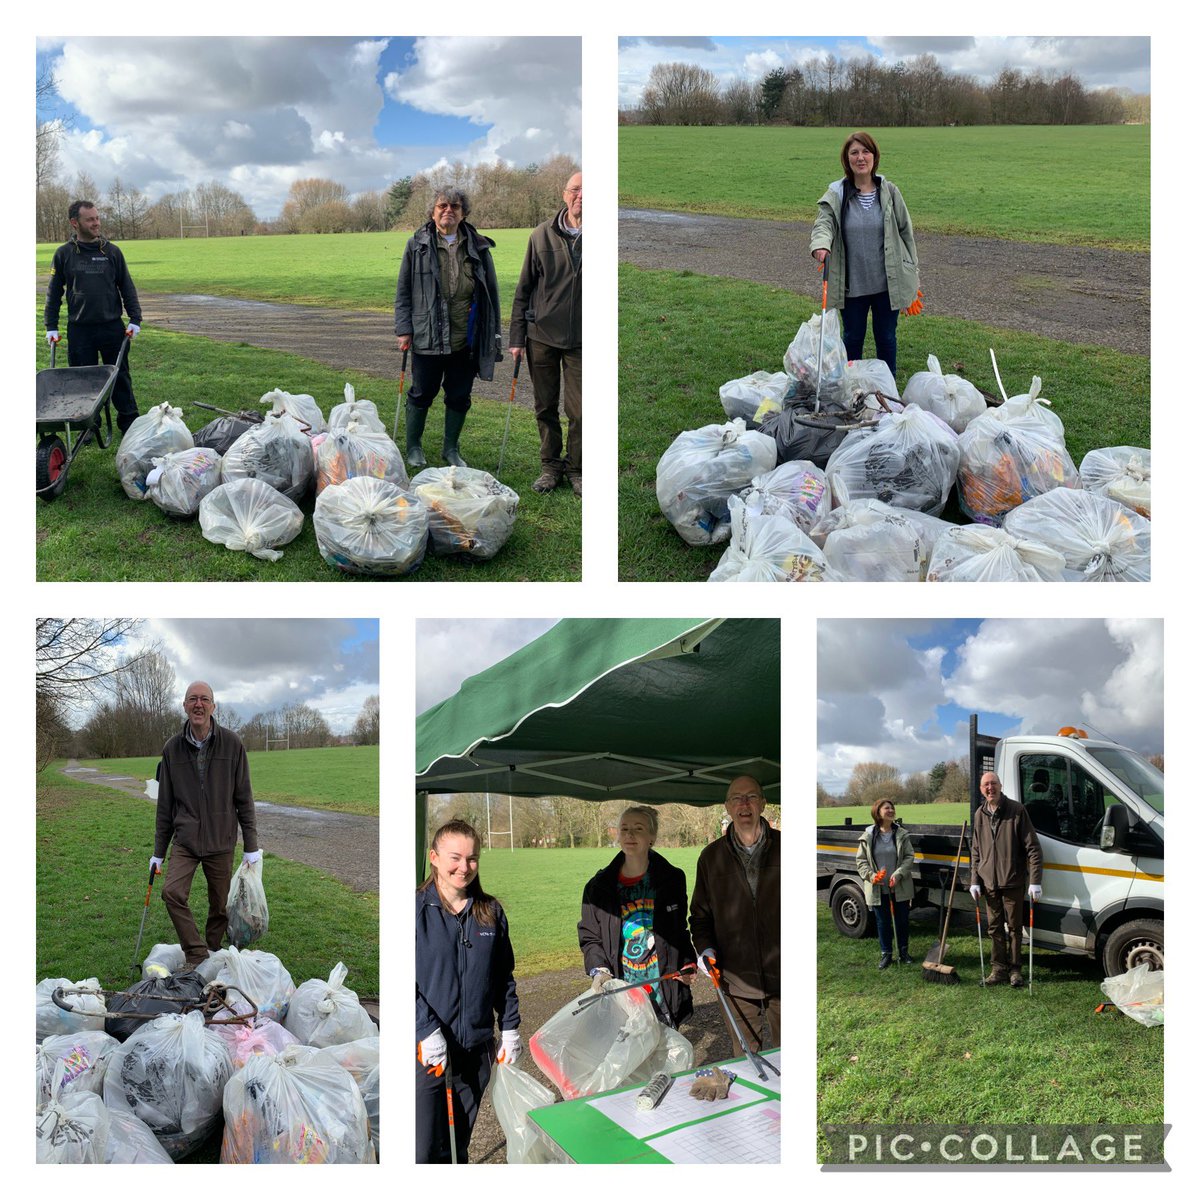 Thanks to Richard @ManCityCouncil for organising clean up of Hough End fields & to Lucy @MCCChorlton @ms_mcfc @GLL_UK staff for joining in. Loads of litter collected!  @parks_great @KeepBritainTidy  #GBspringClean #LitterHeroes